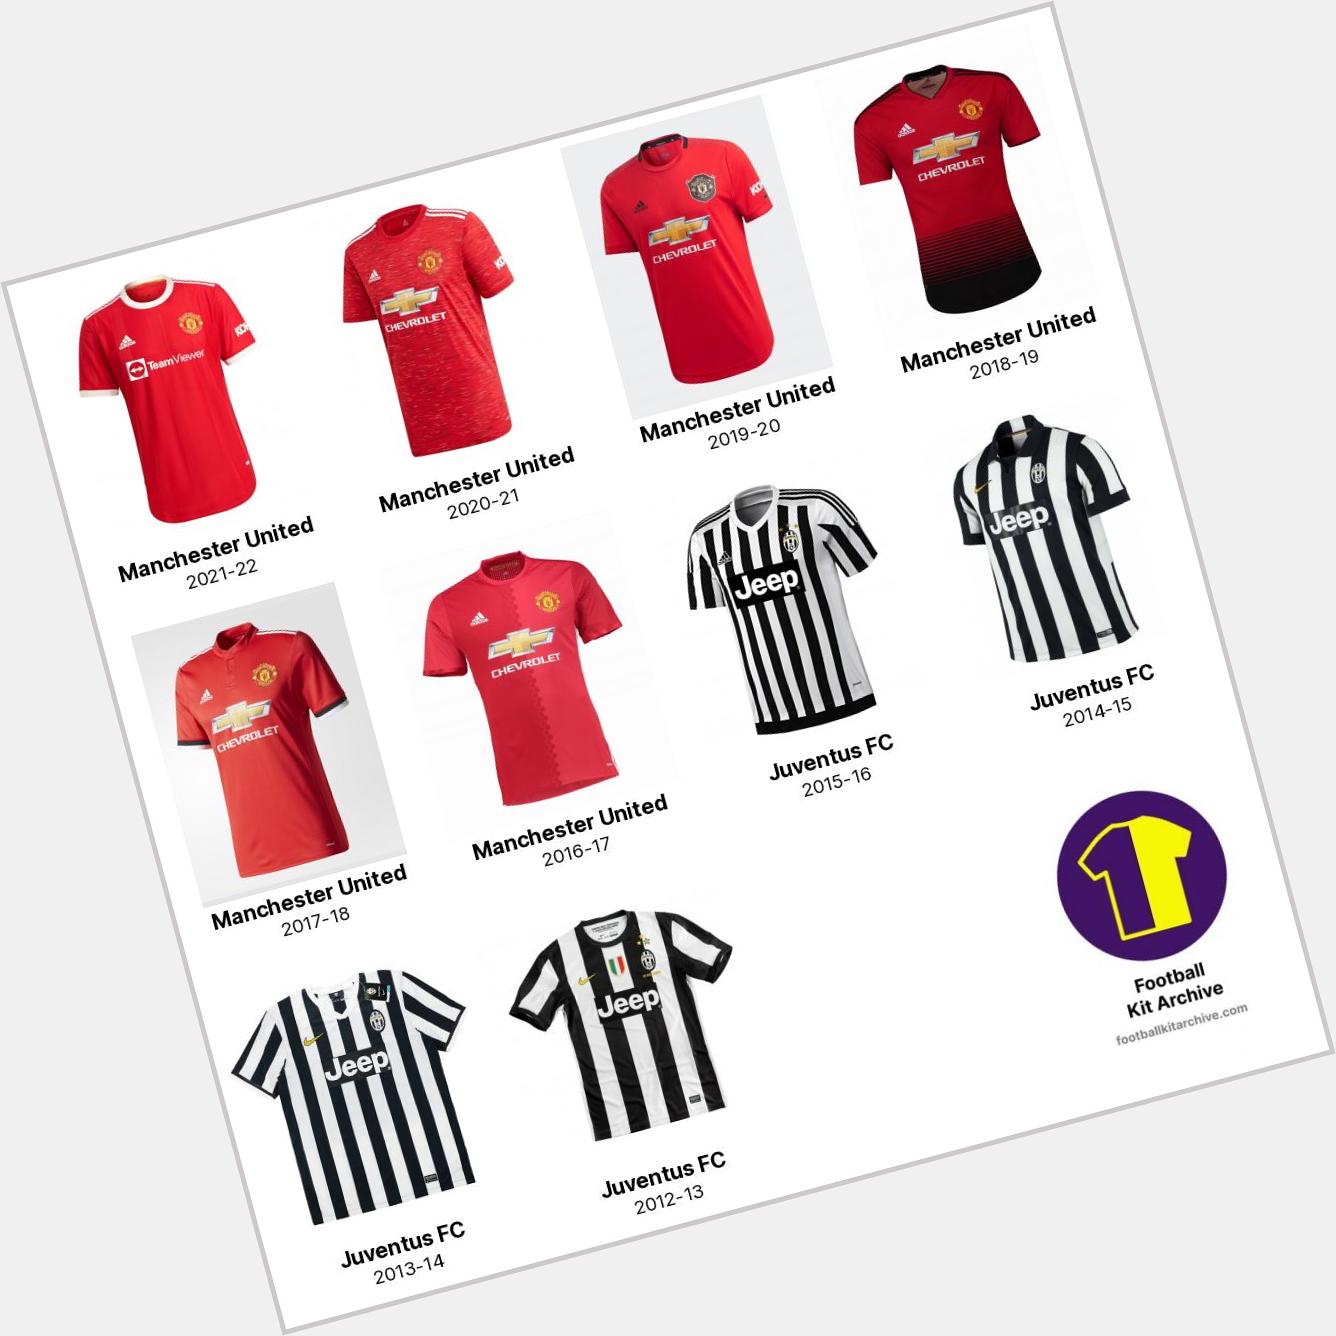  Happy Birthday, Paul Pogba - Here\s his Career in Shirts

Which one\s your favorite?  